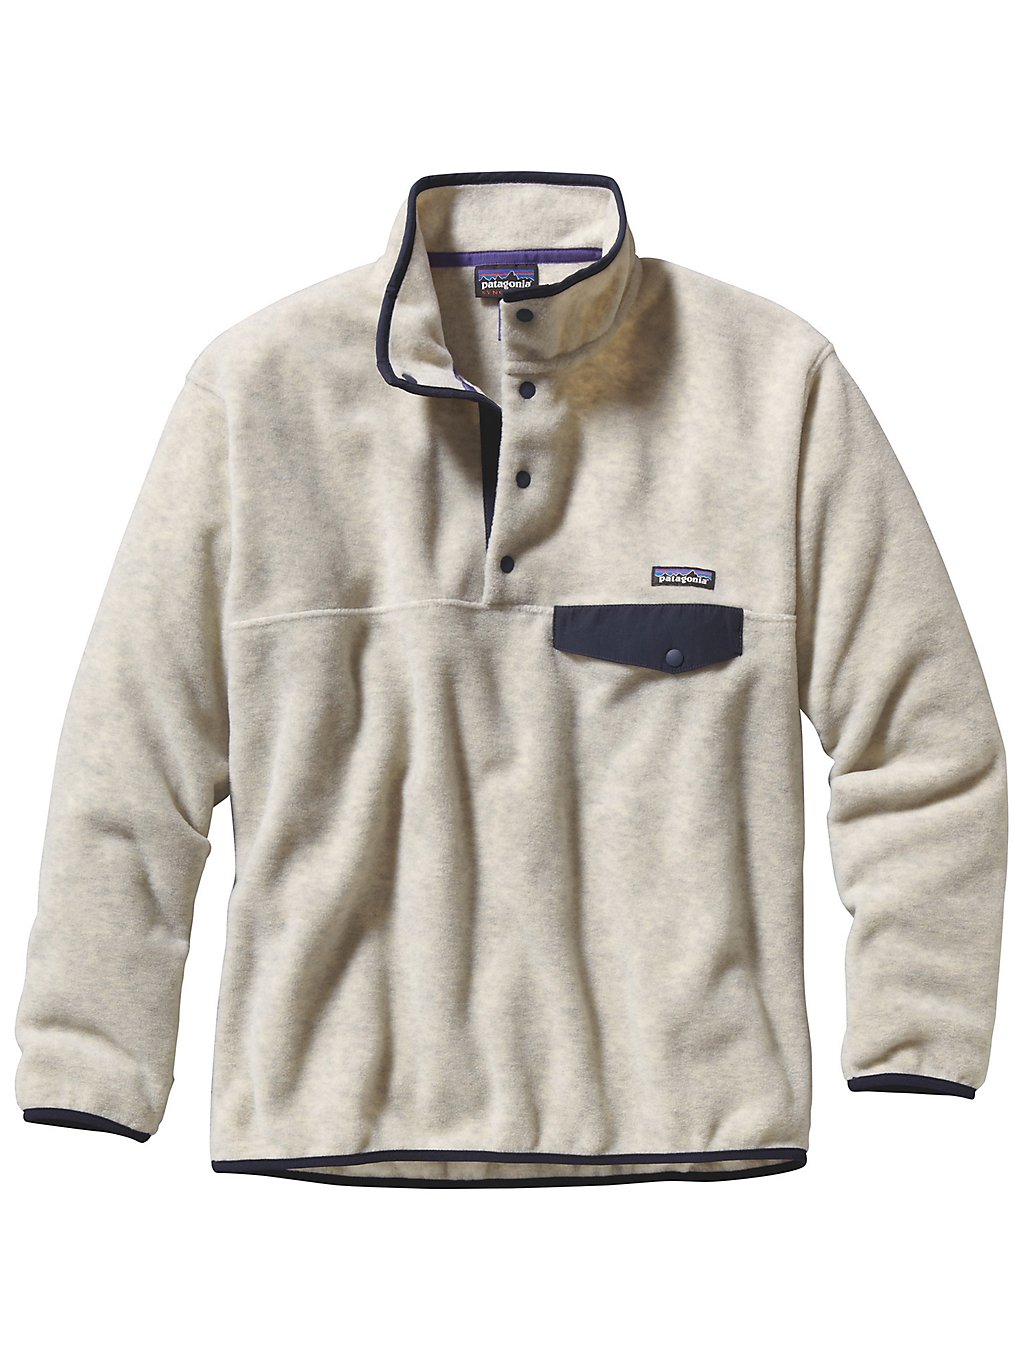 Patagonia Synch Snap-T Fleece Sweater oatmeal heather